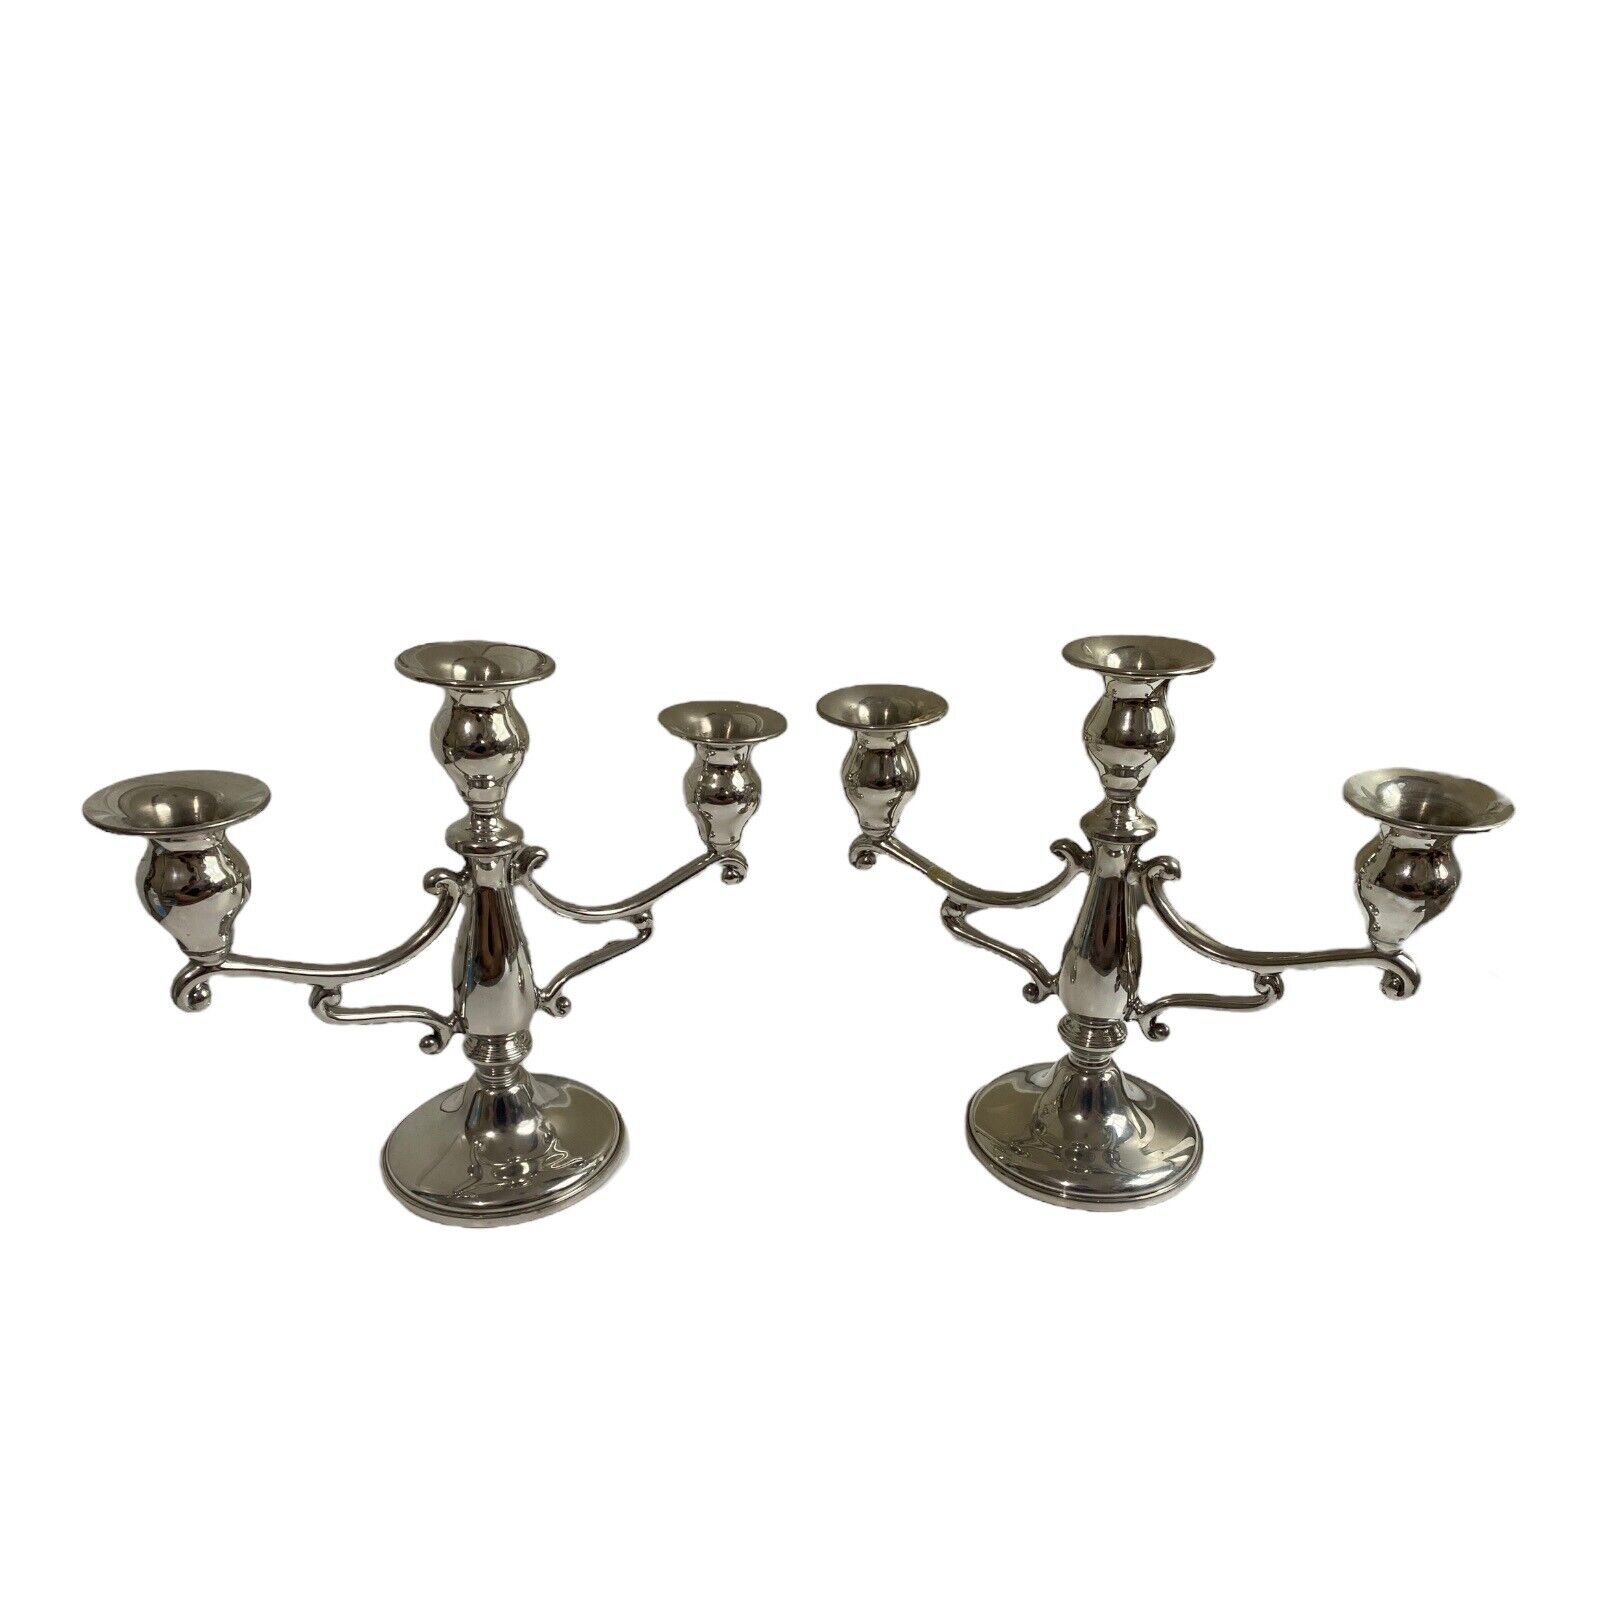 Pair Of Empire Silver USA Pewter Candelabras 3 Arm Candlesticks 9.75” Set Props